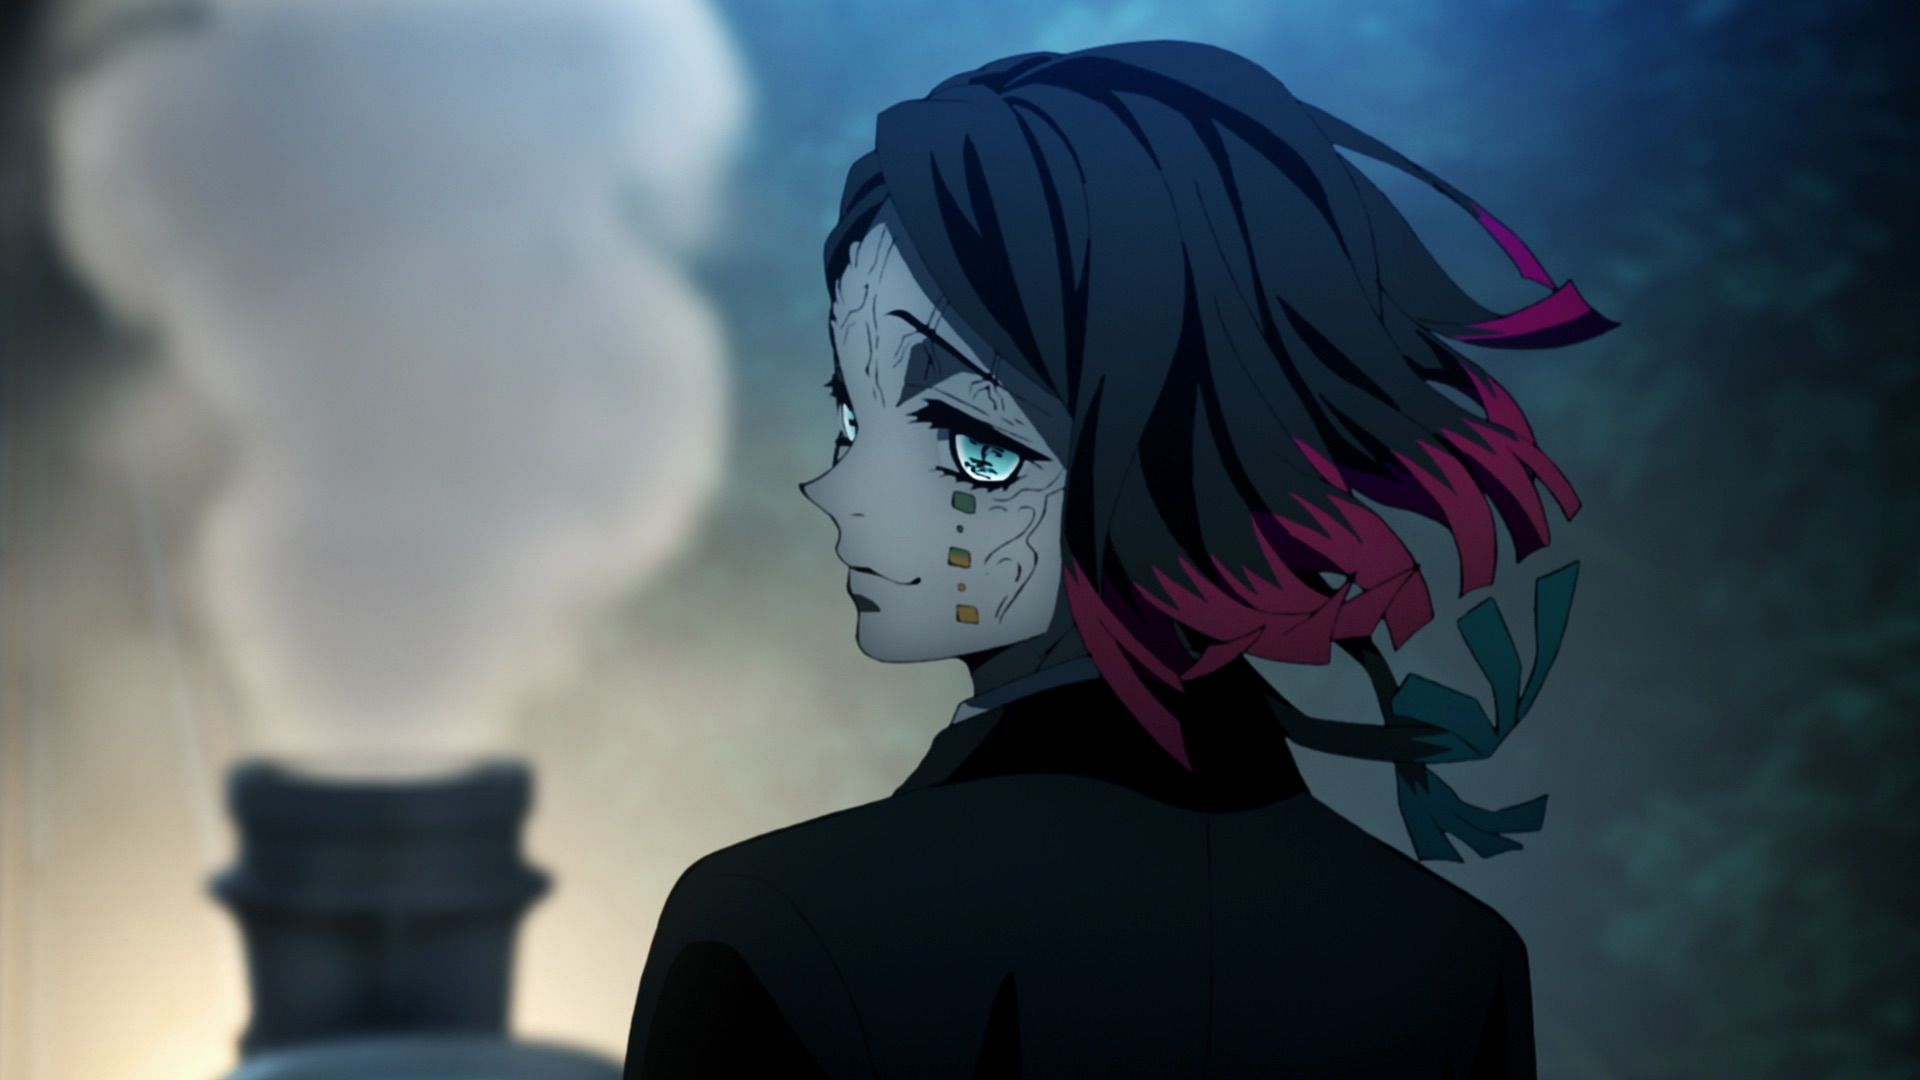 Demon Slayer season 2 has been delivering on all fronts (image via Netflix)